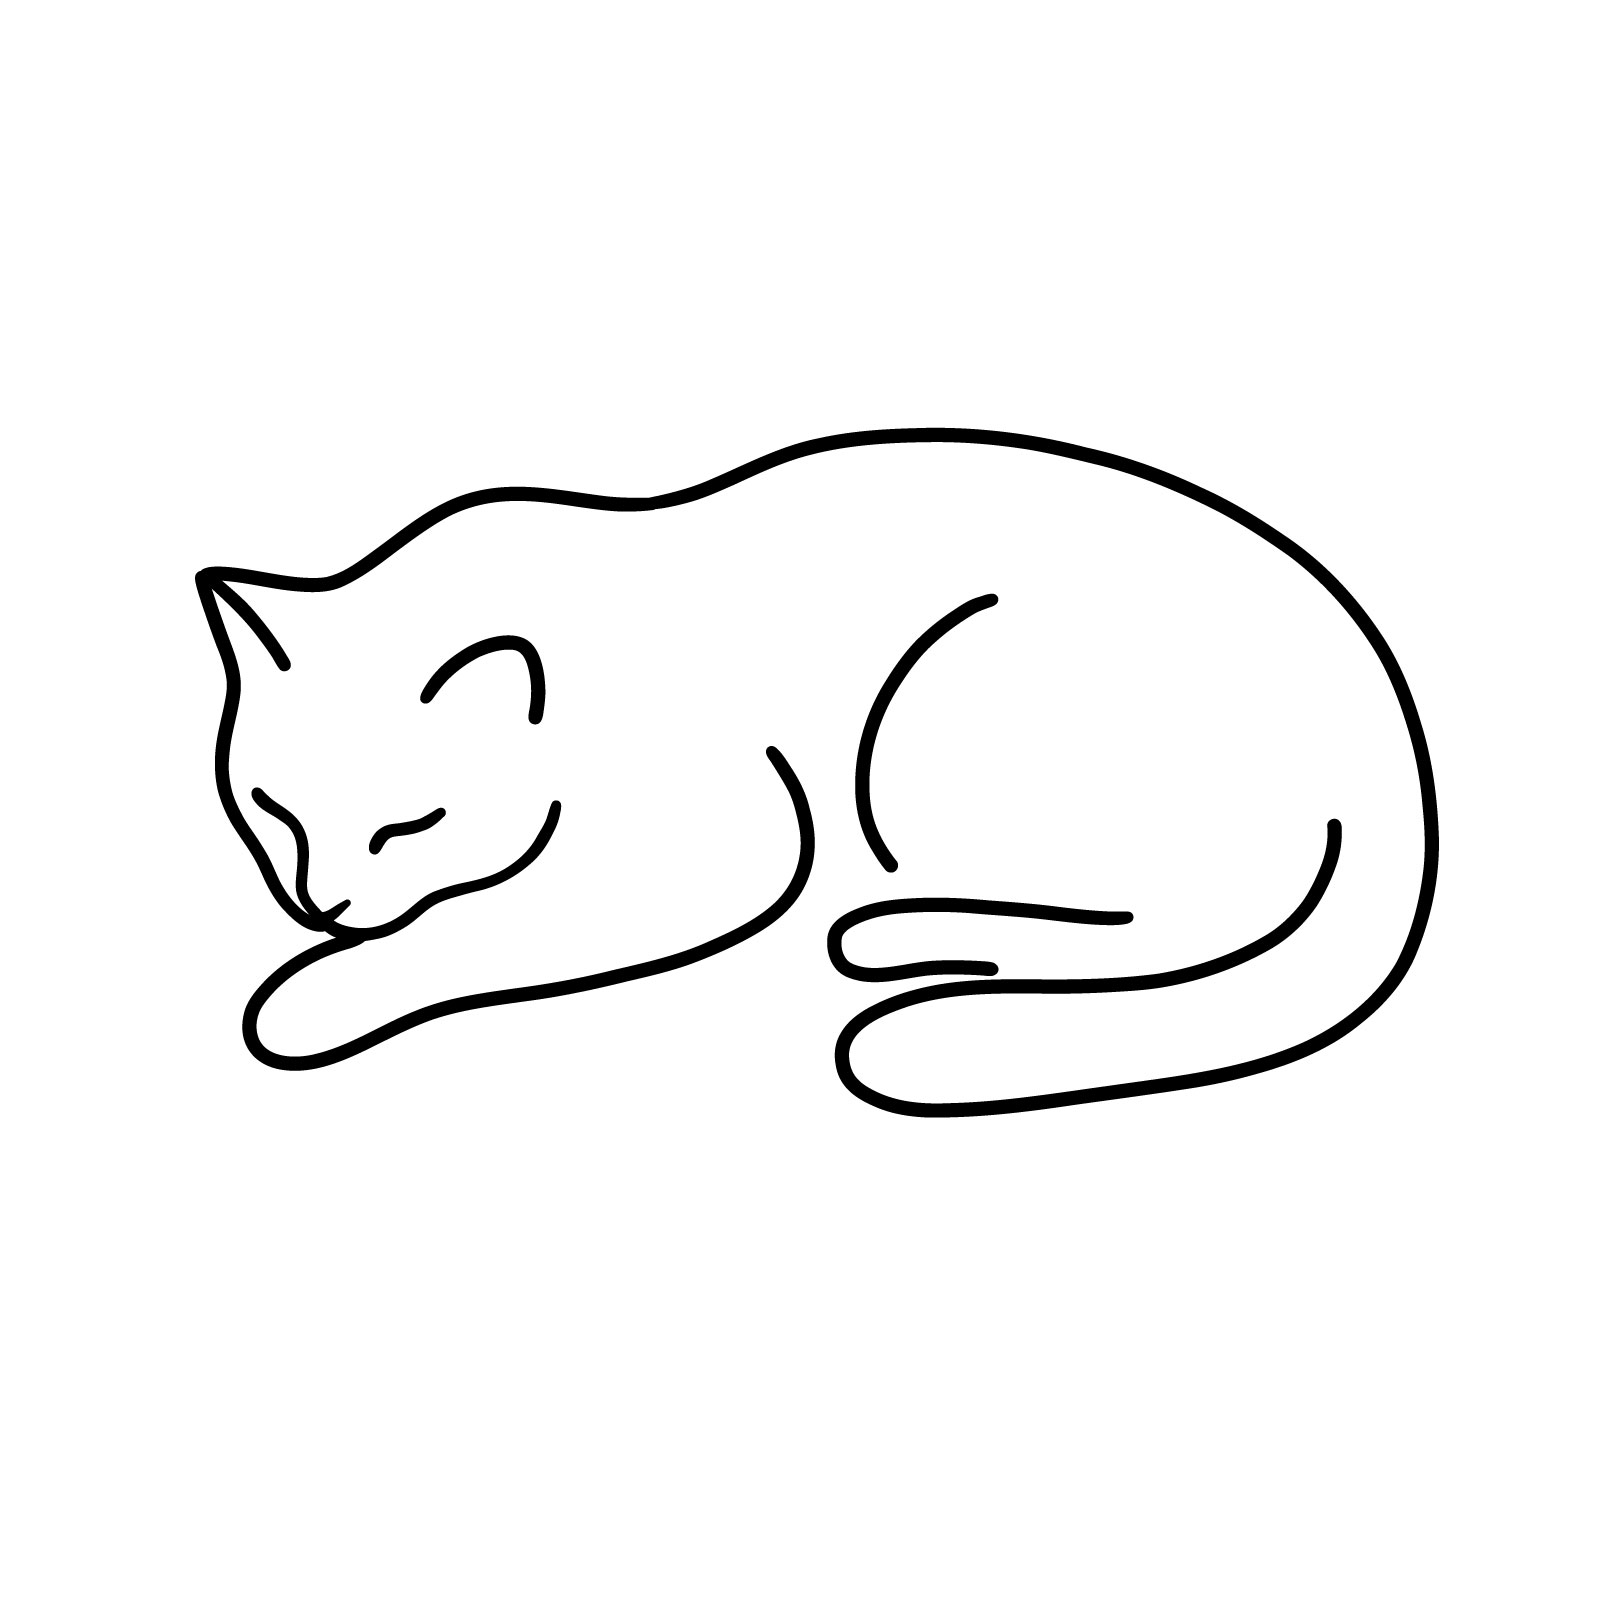 A minimalistic sleeping cat easy drawing - the result